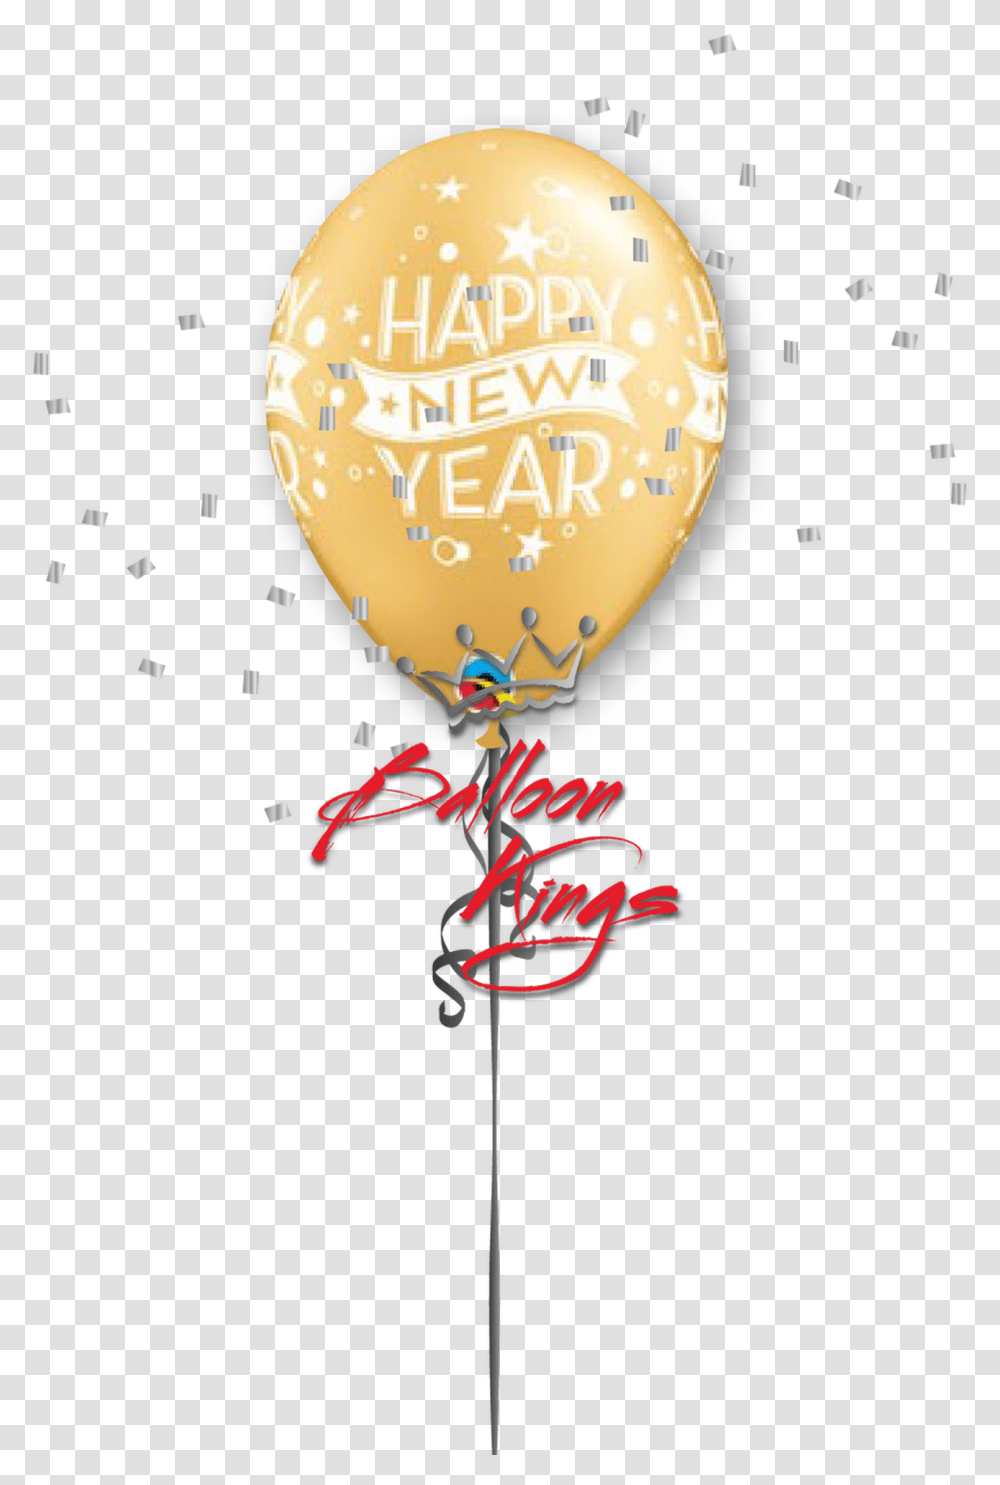 Latex New Year Confetti Gold Picsart Editing Background Full Hd, Balloon Transparent Png